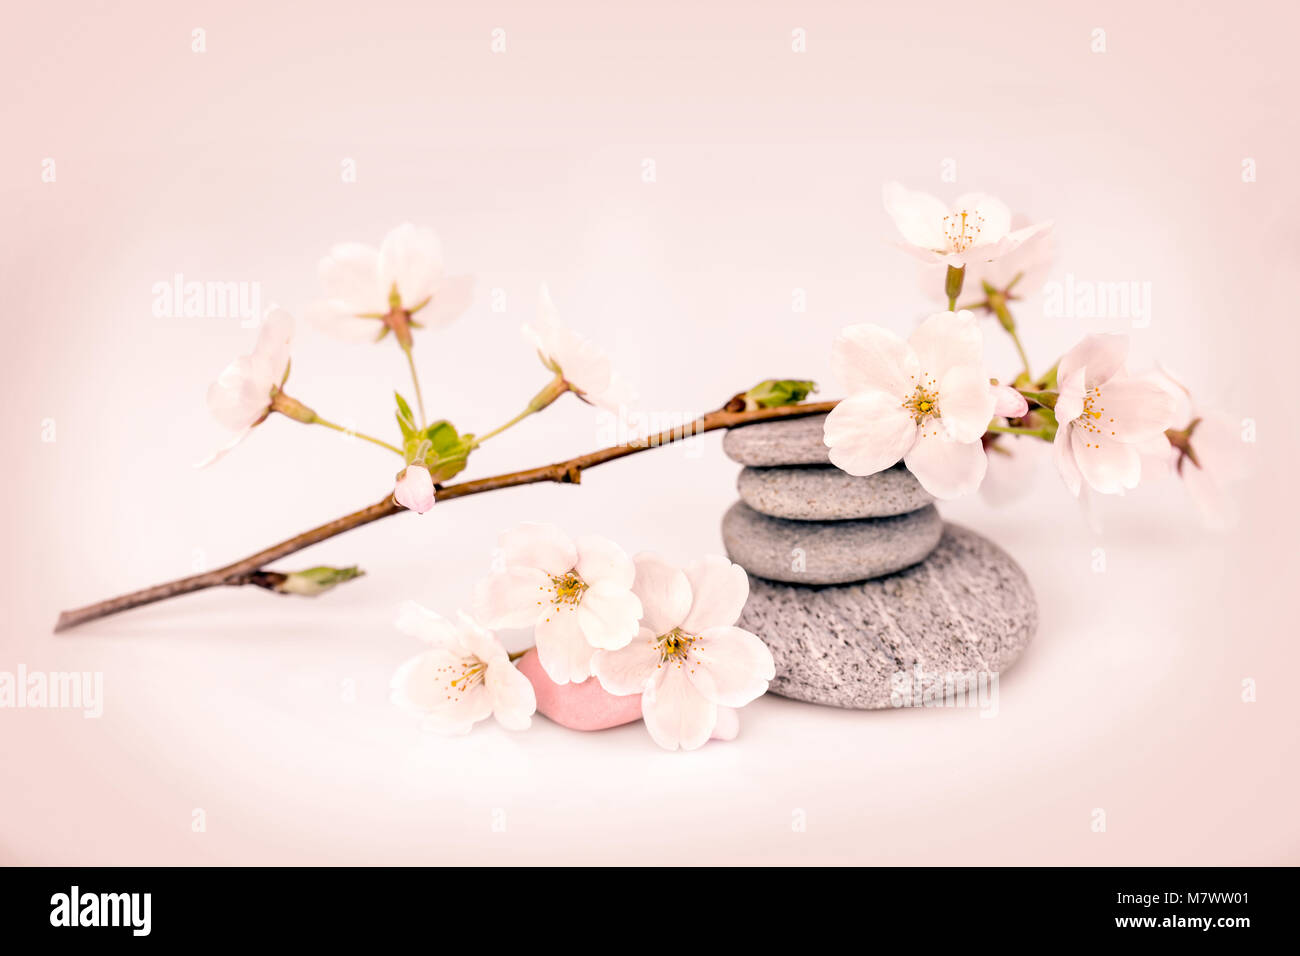 Cherry tree flower branch and pebbles, zen composition Stock Photo